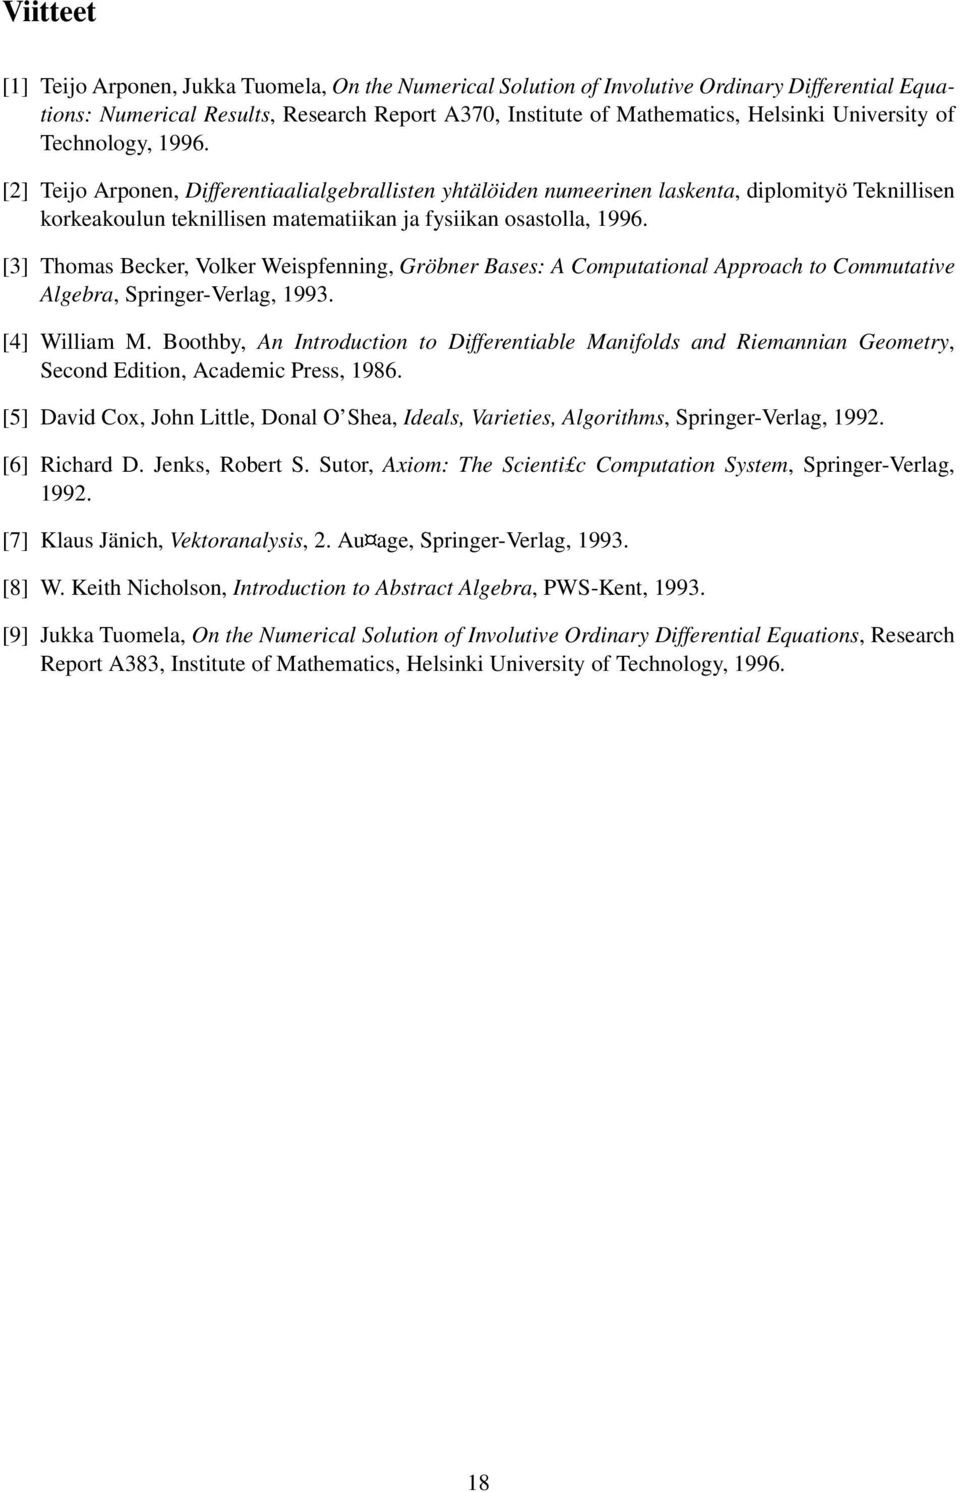 [3] Tomas Becker, Volker Weispfenning, Gröbner Bases: A omputational Approac to ommutative Algebra, Springer-Verlag, 1993 [4] William M Bootby, An Introduction to Differentiable Manifolds and